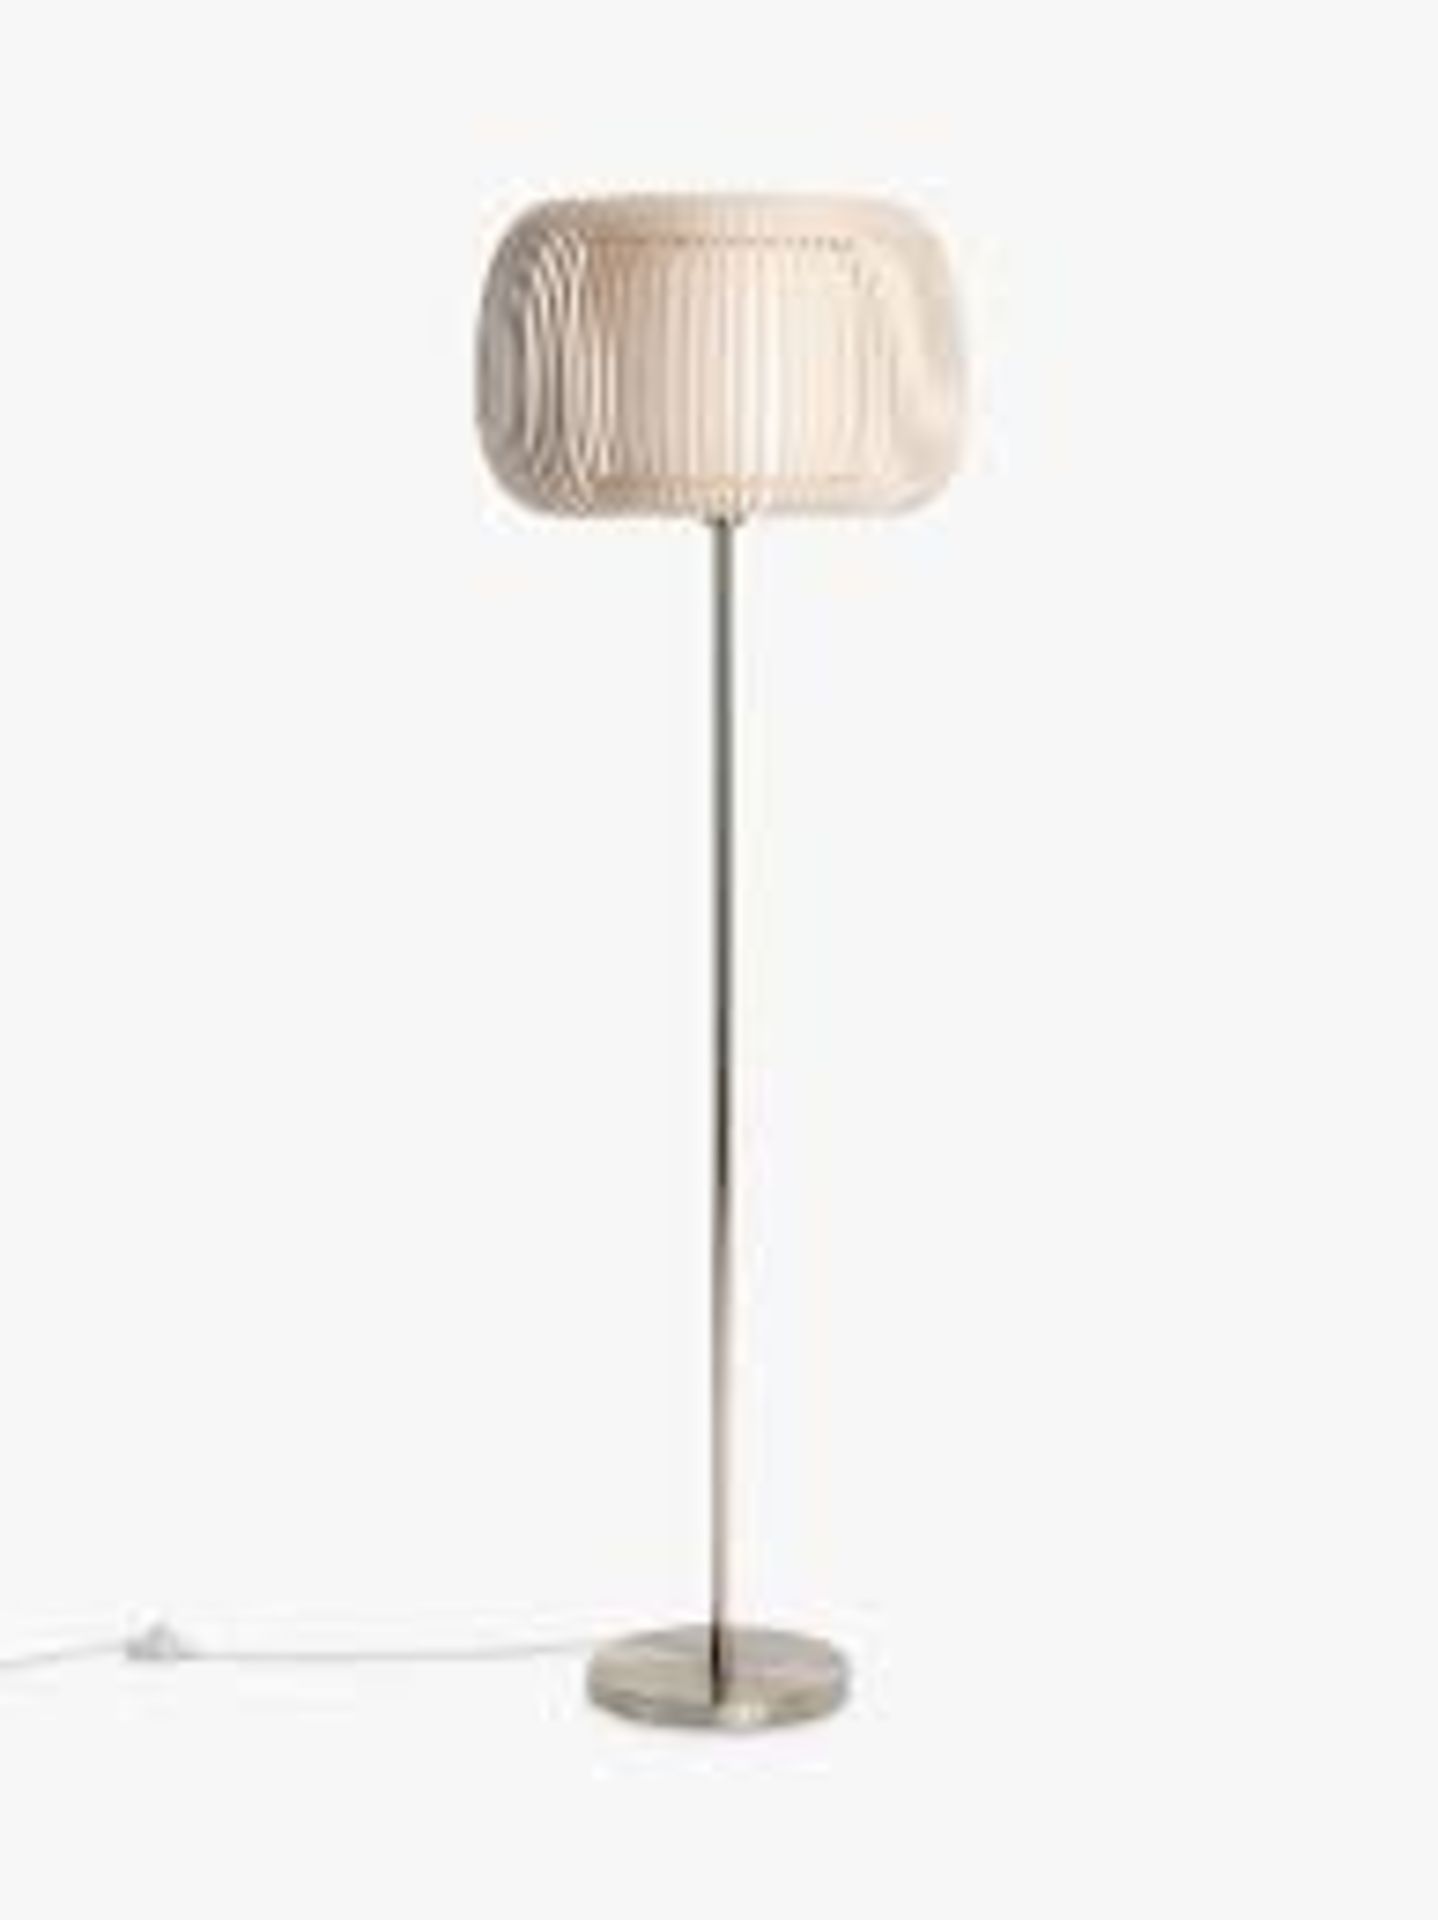 Boxed Harmony Floor Lamp Grey Fabric Shade (Shade Only) RRP £175 (2597688) (Viewing/Appraisals